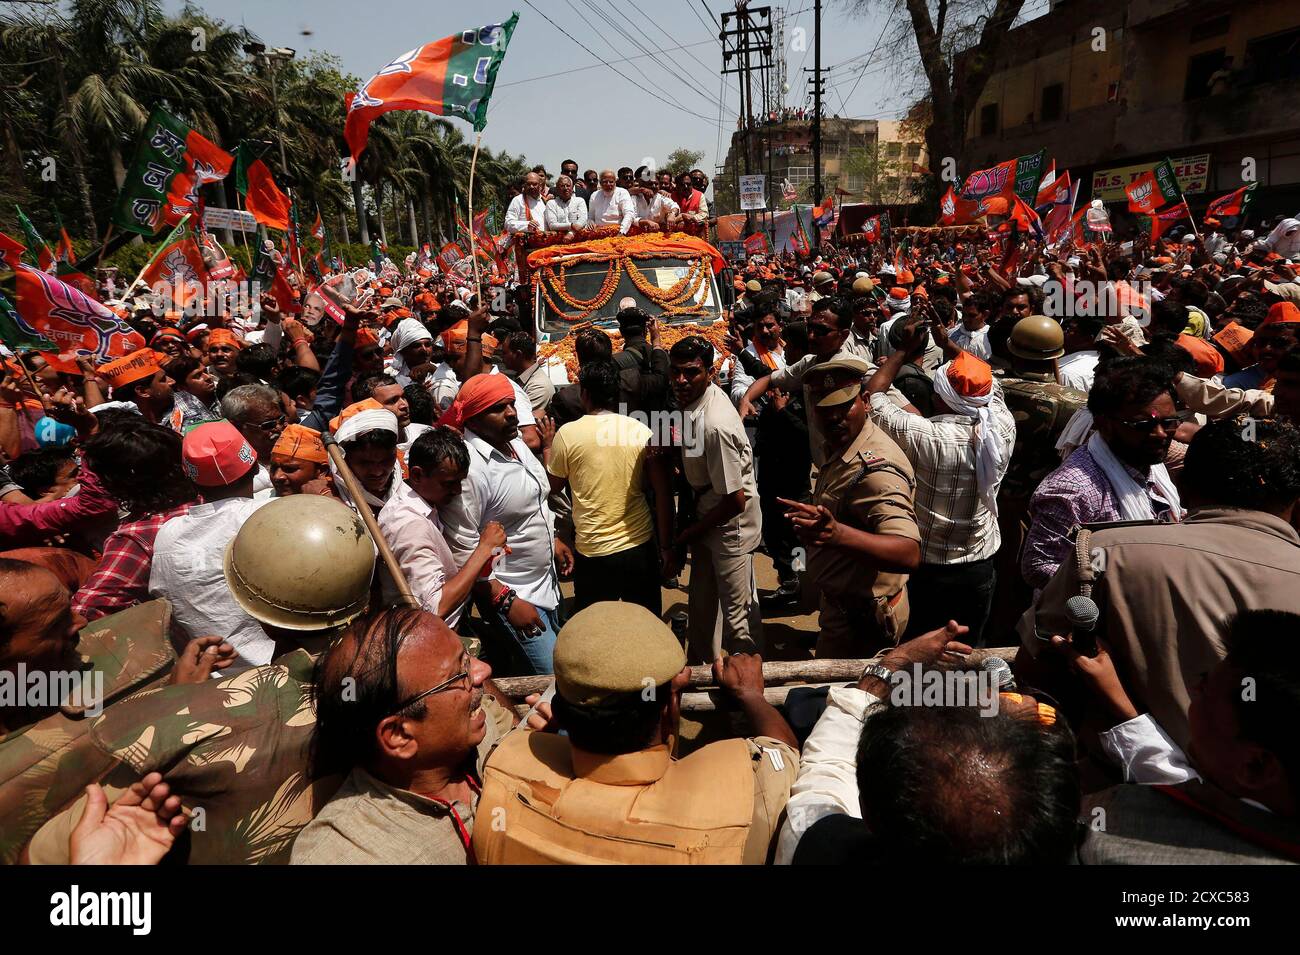 Police try to clear the way for Hindu nationalist Narendra Modi, prime  ministerial candidate for India's main opposition Bharatiya Janata Party ( BJP), as he arrives to file his nomination papers for the